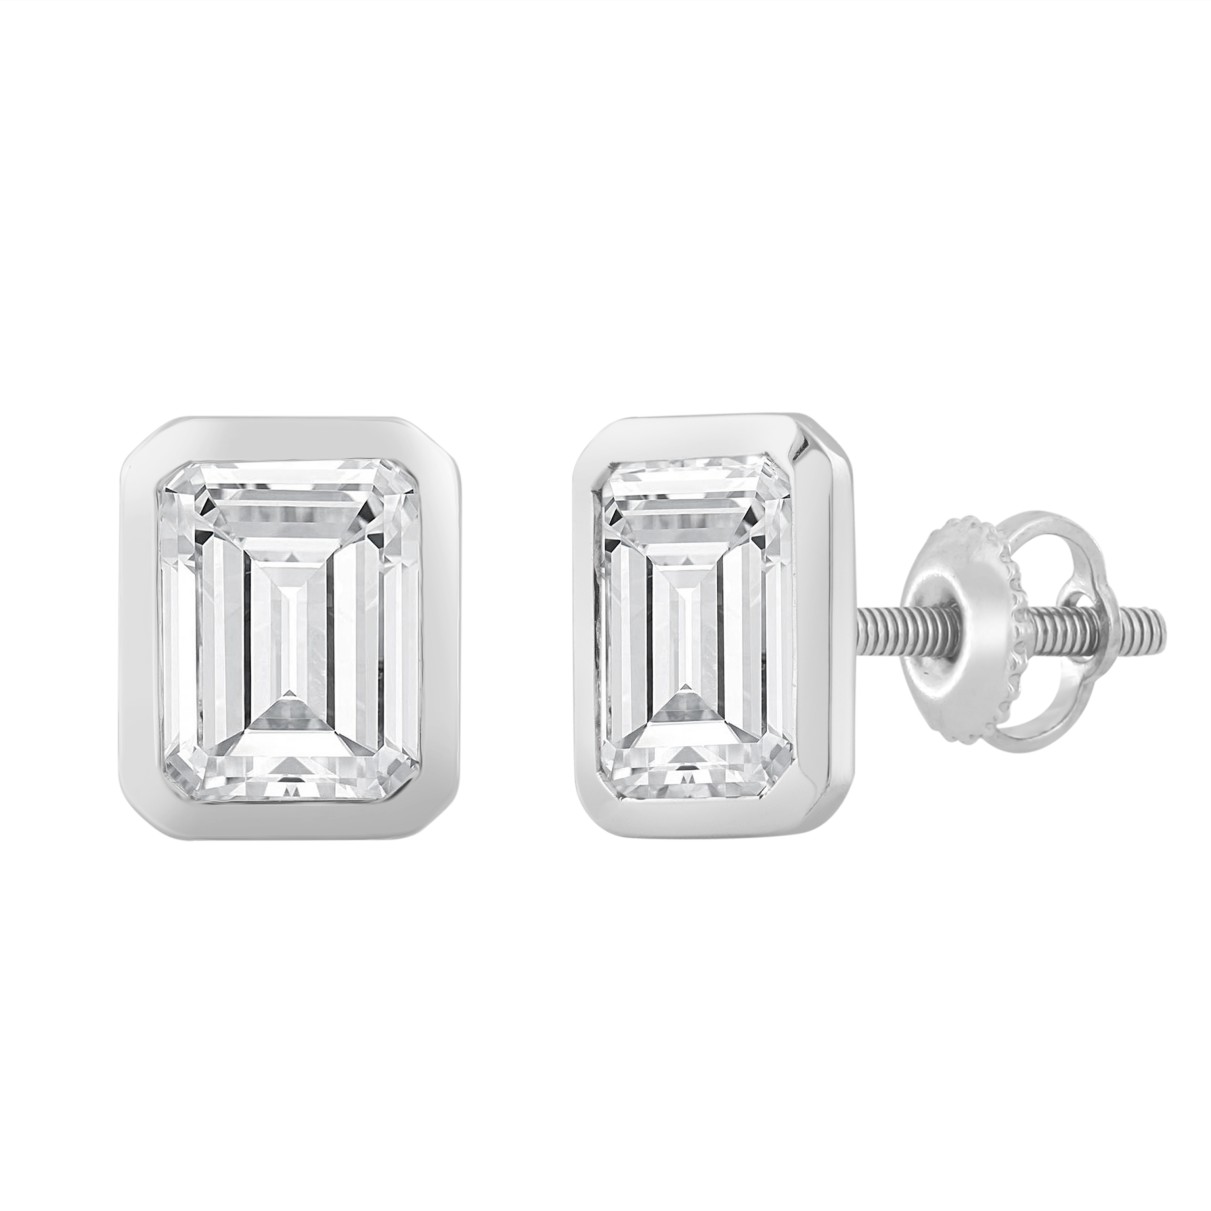 LADIES SOLITAIRE EARRINGS 3CT EMERALD DIAMOND 14K WHITE GOLD 